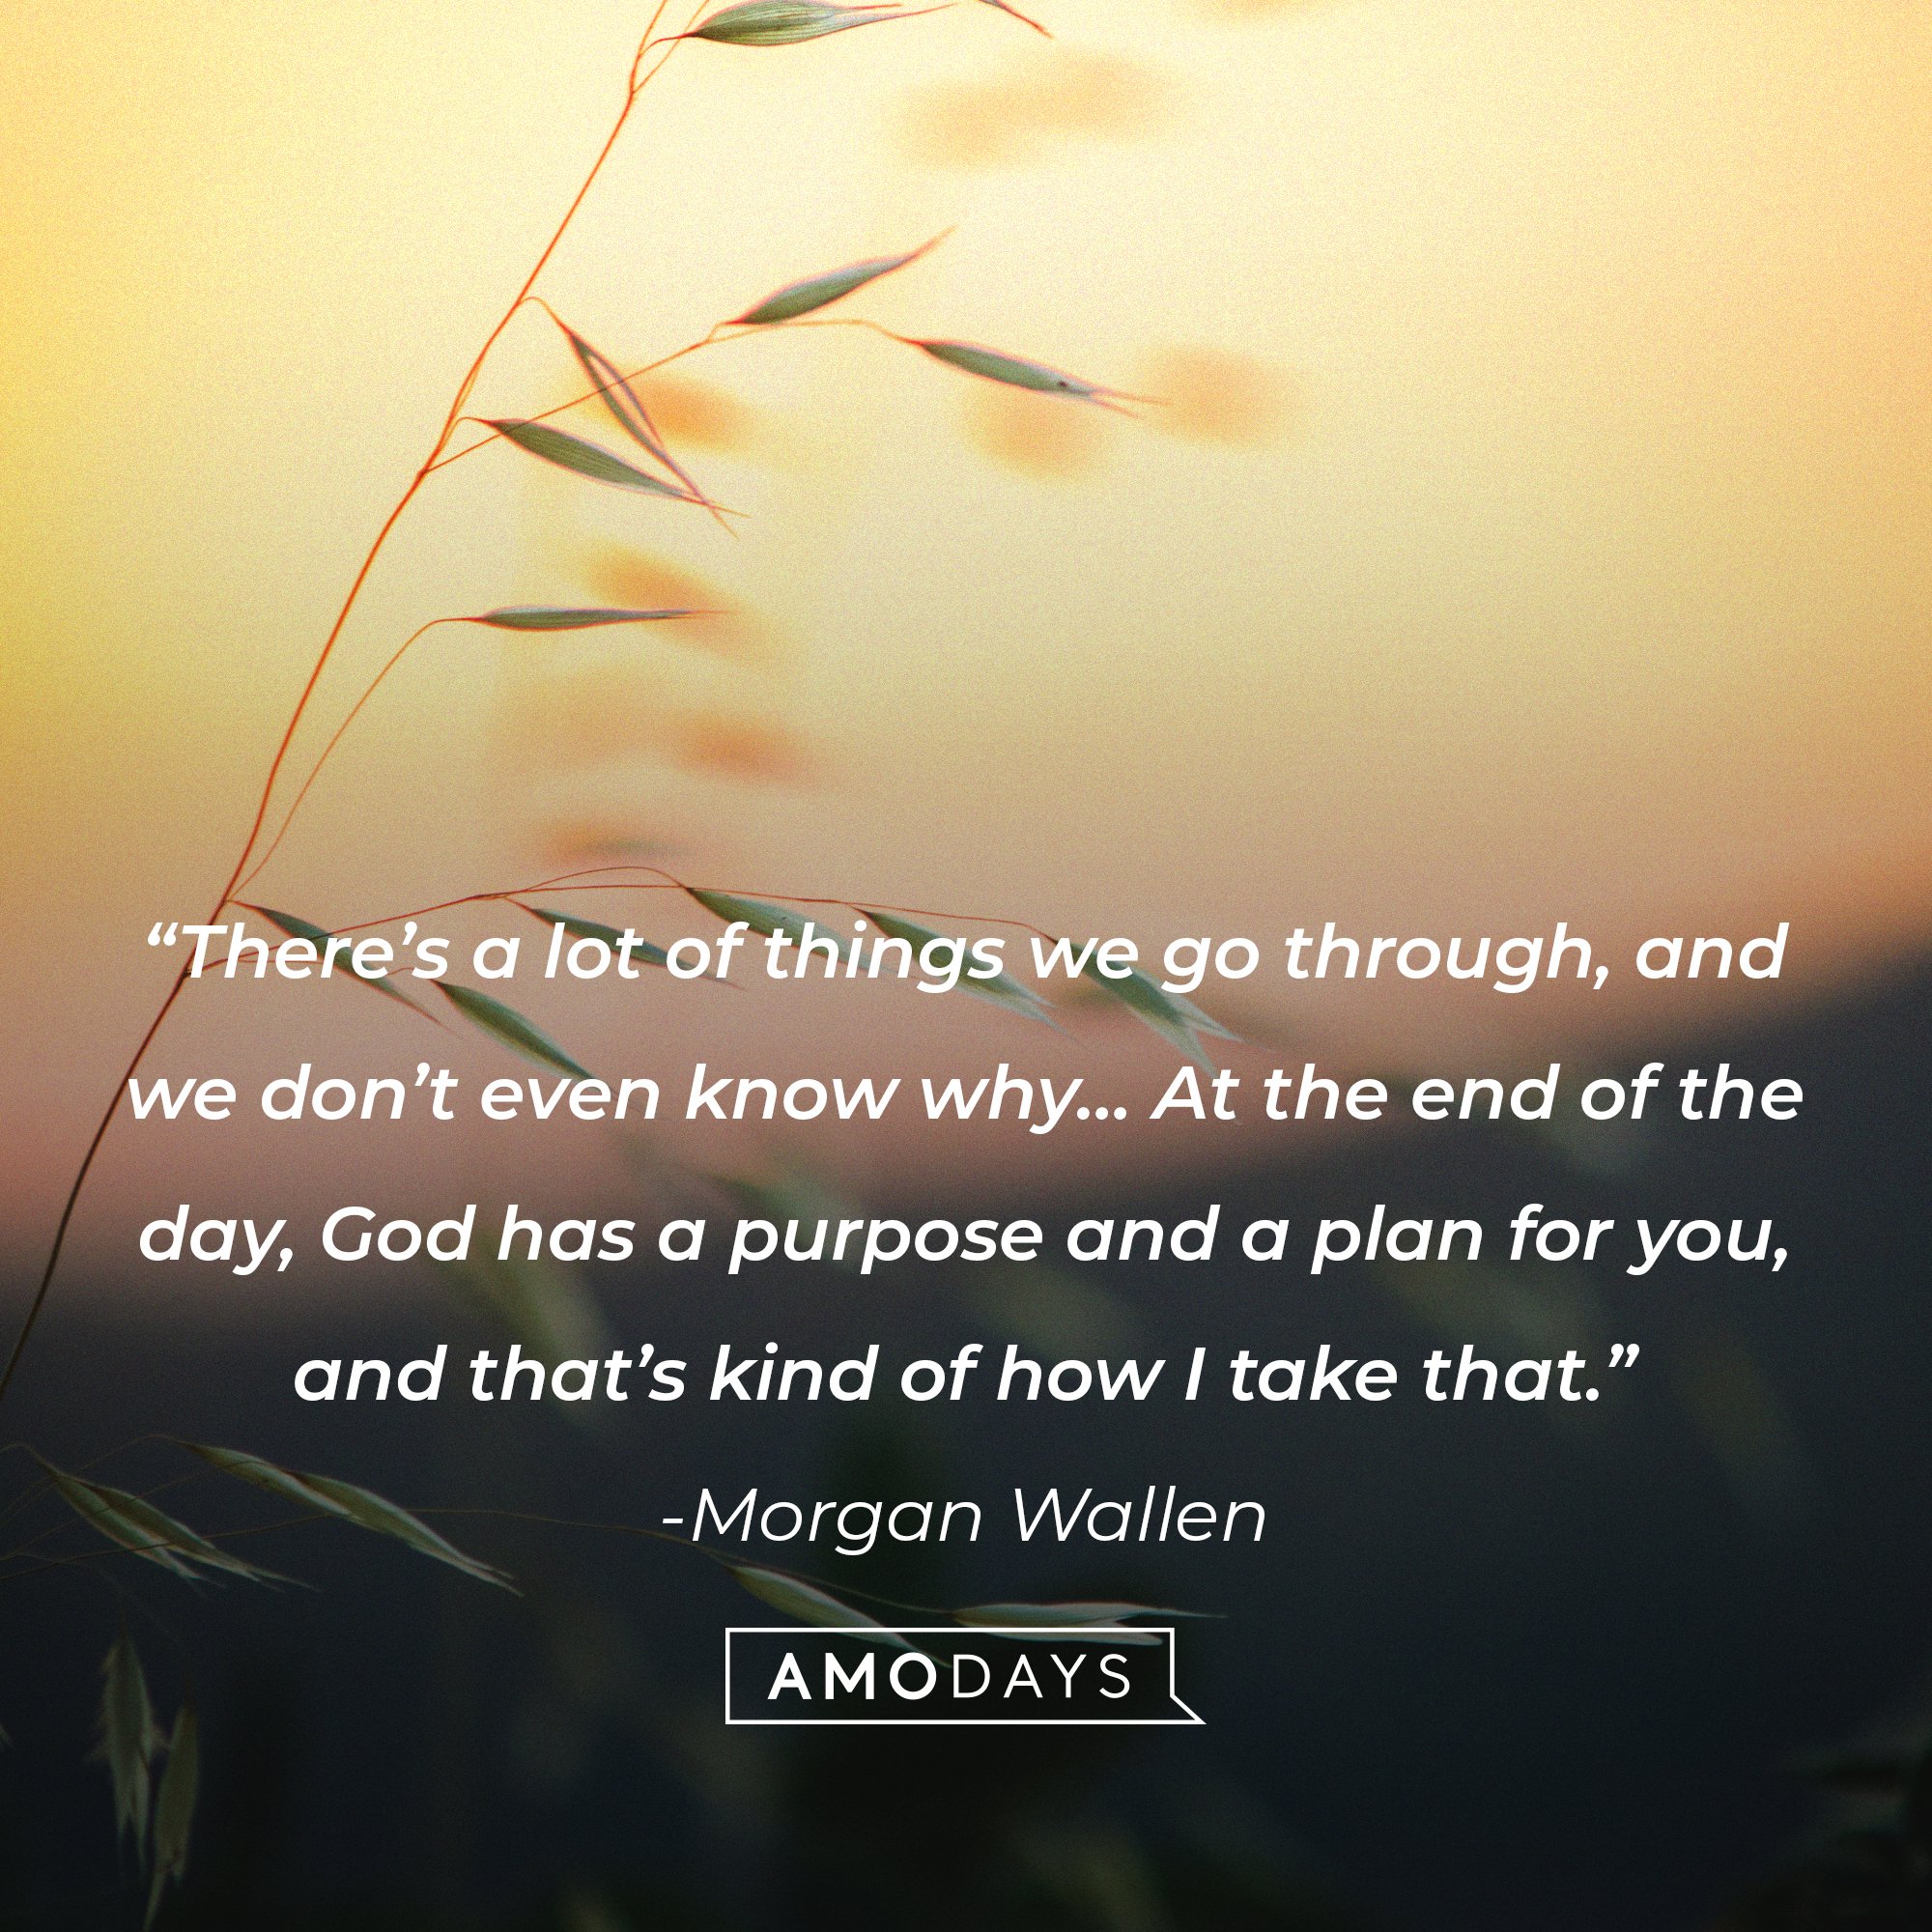  Morgan Wallen’s quote: “There’s a lot of things we go through, and we don’t even know why… At the end of the day, God has a purpose and a plan for you, and that’s kind of how I take that.”I Image: AmoDays